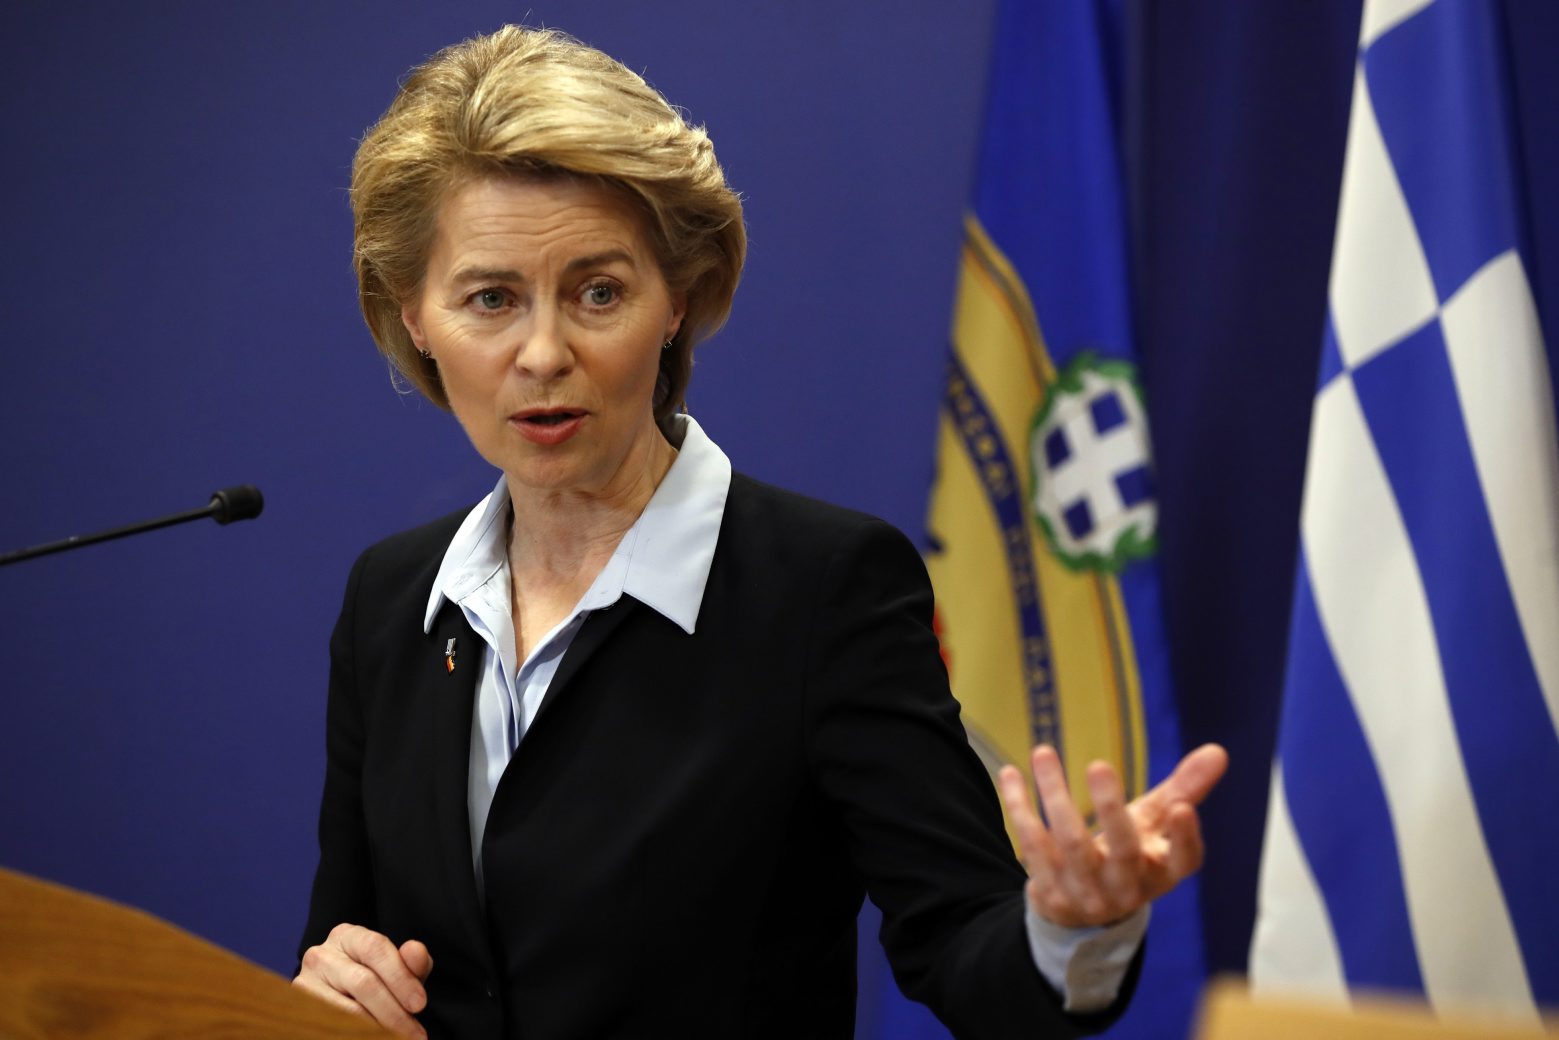 FILE - In this Tuesday, March 5, 2019 file photo, German Minister of Defense Ursula von der Leyen speaks in Athens. European Union leaders on Tuesday, July 2, 2019, after a lengthy session of talks, have nominated current German Defense Minister Ursula von der Leyen for the post of President of the European Commission. (AP Photo/Thanassis Stavrakis, File) Belgium Europe Top Jobs